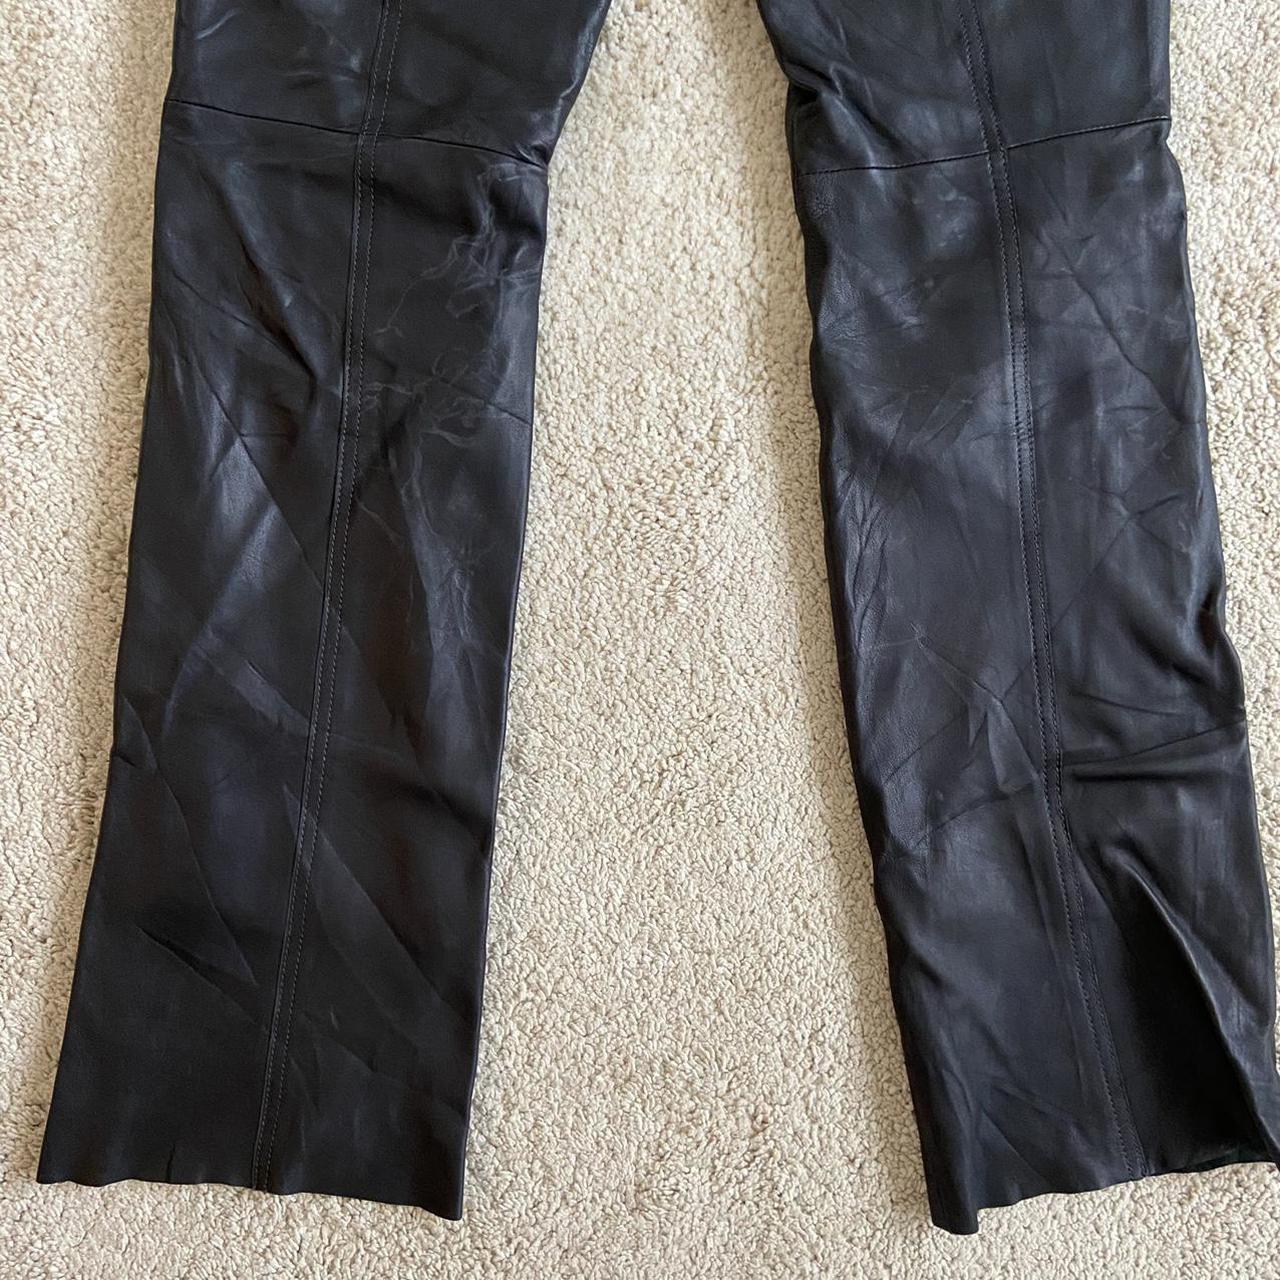 lowrise danier leather pants (if these fit me…….i... - Depop